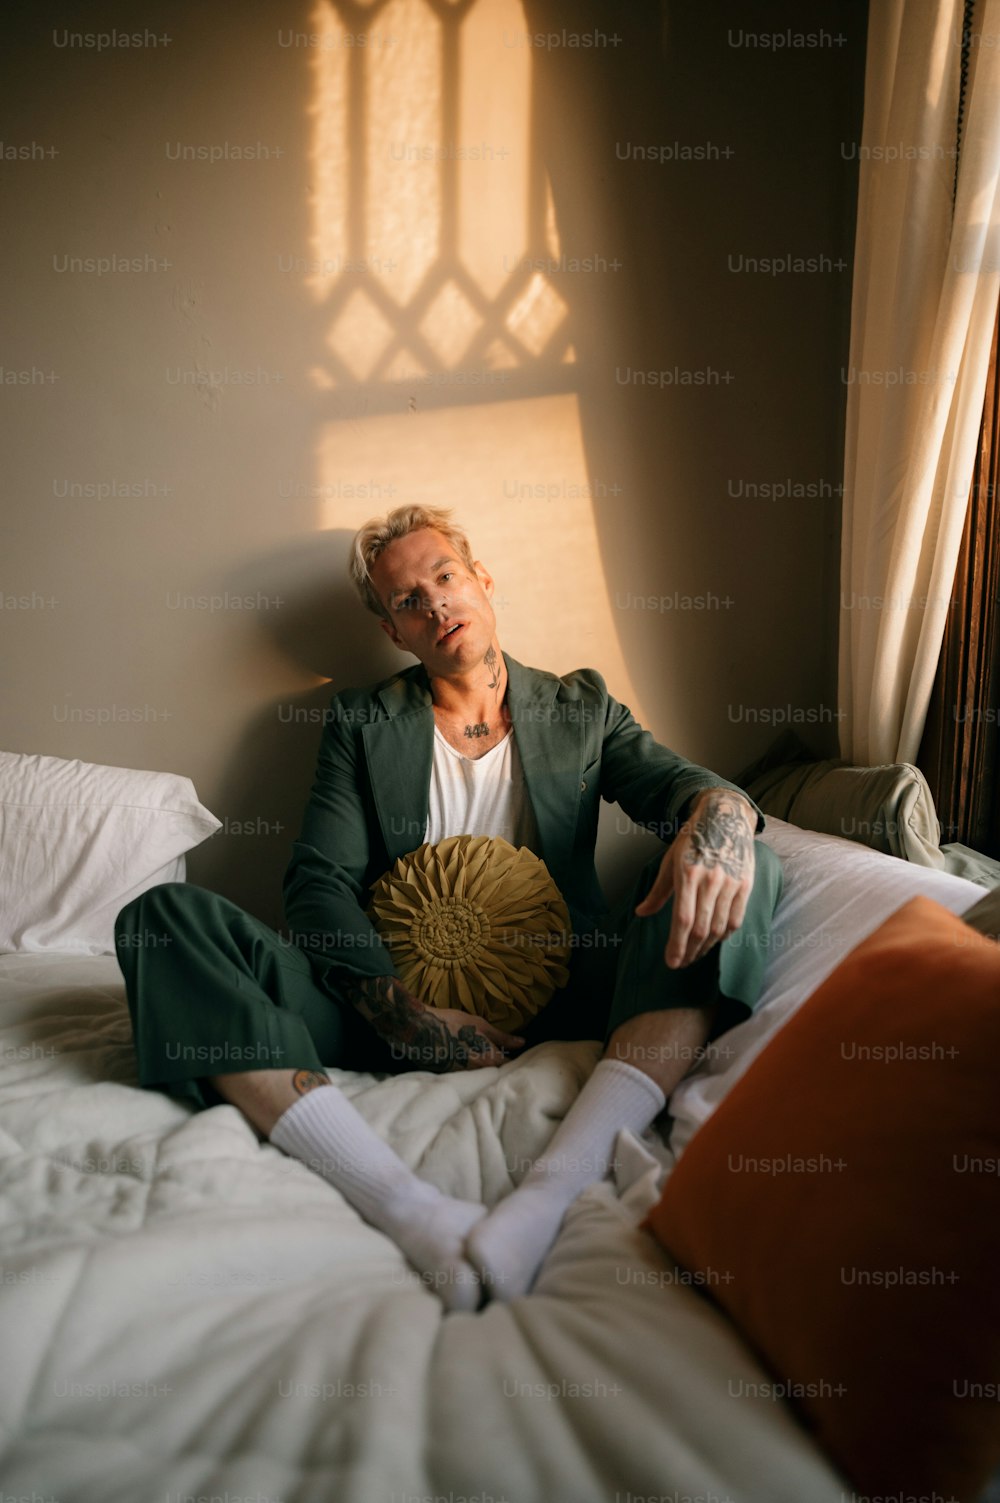 a person in a suit sitting on a bed with a pillow